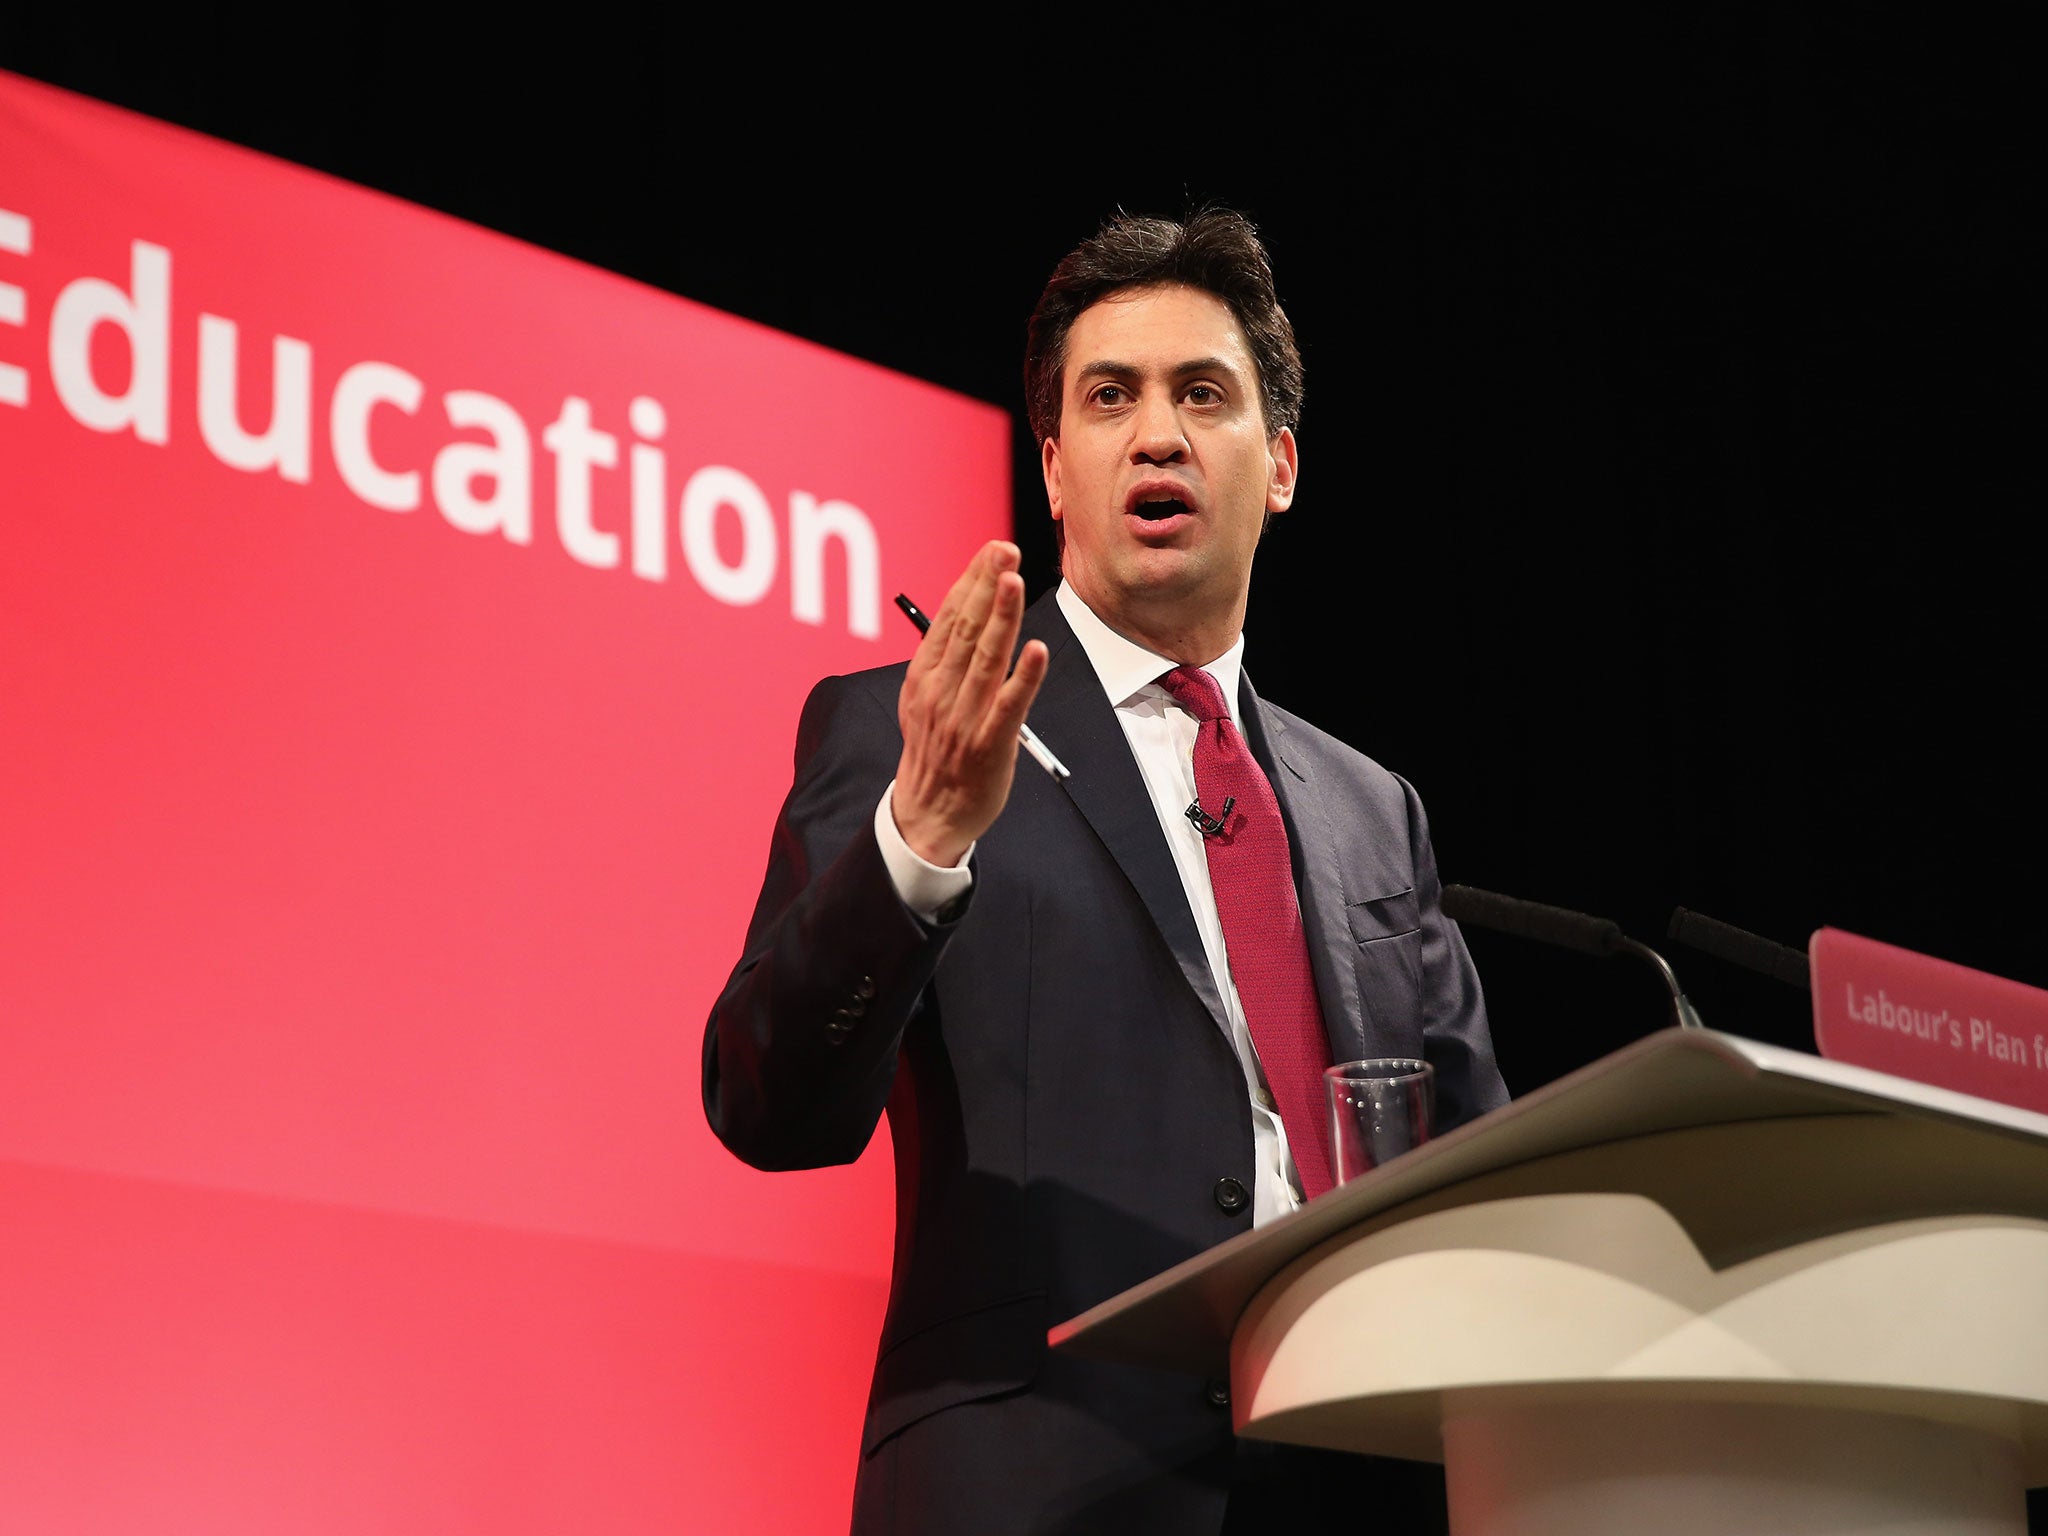 Ed Miliband said he stood by his comments in the Commons (Getty Images)